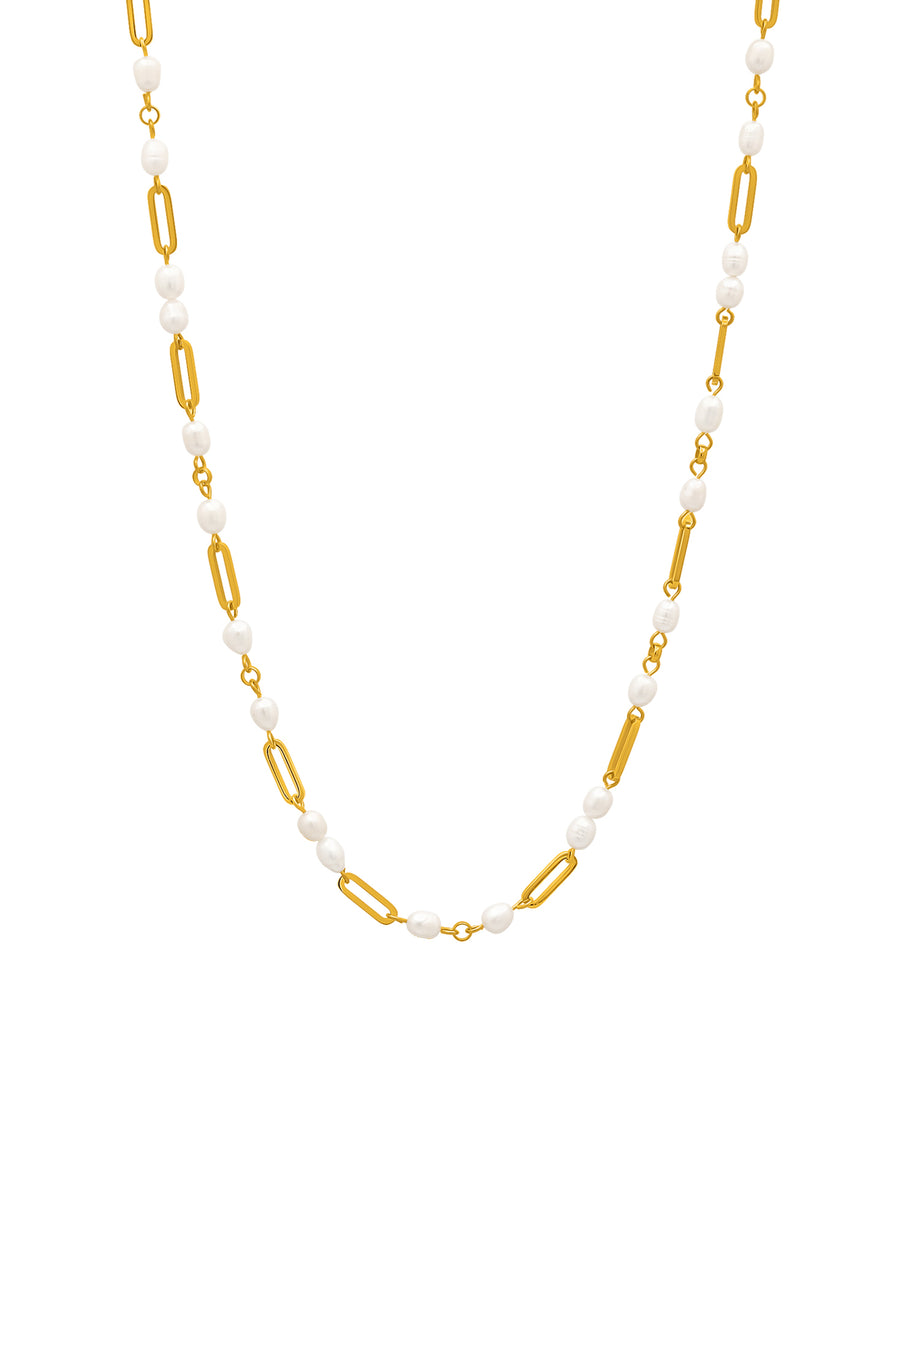 Freshwater Pearl Link Chain Necklace